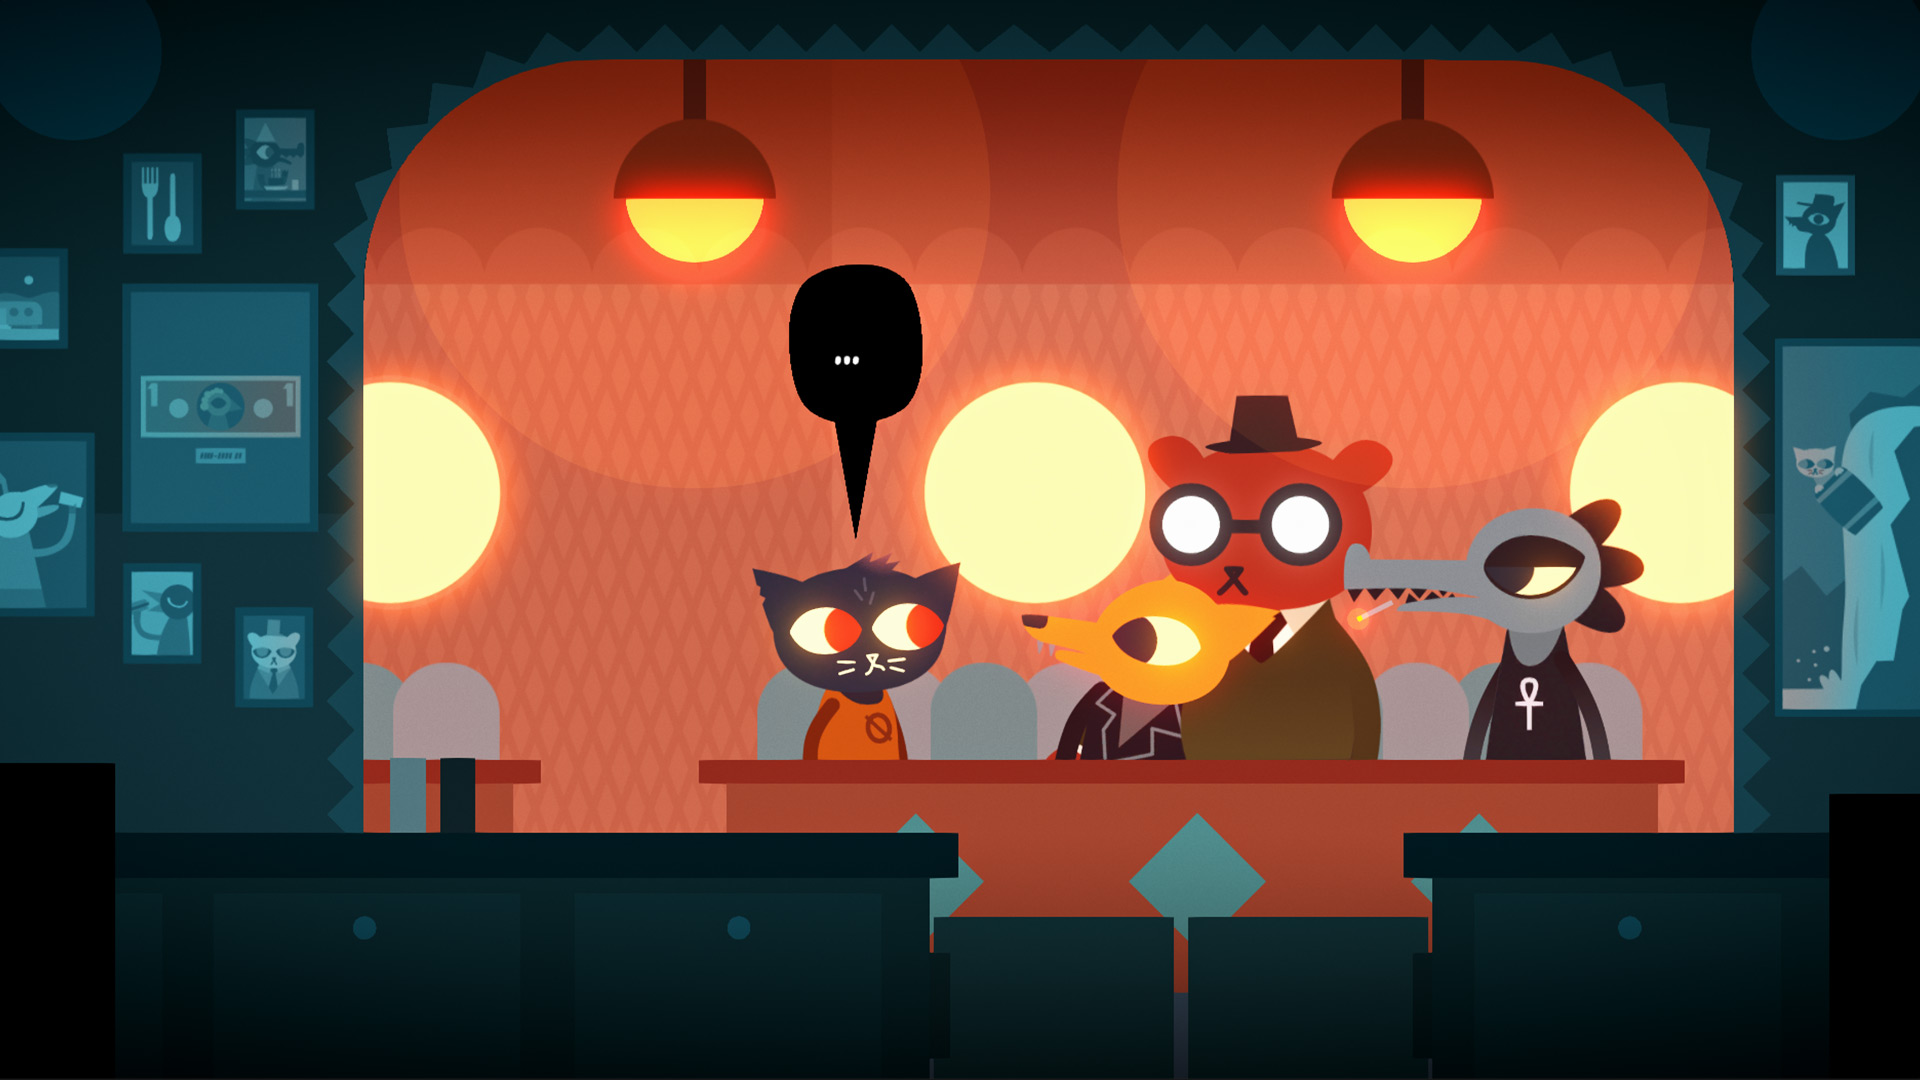 Night in the Woods on Steam